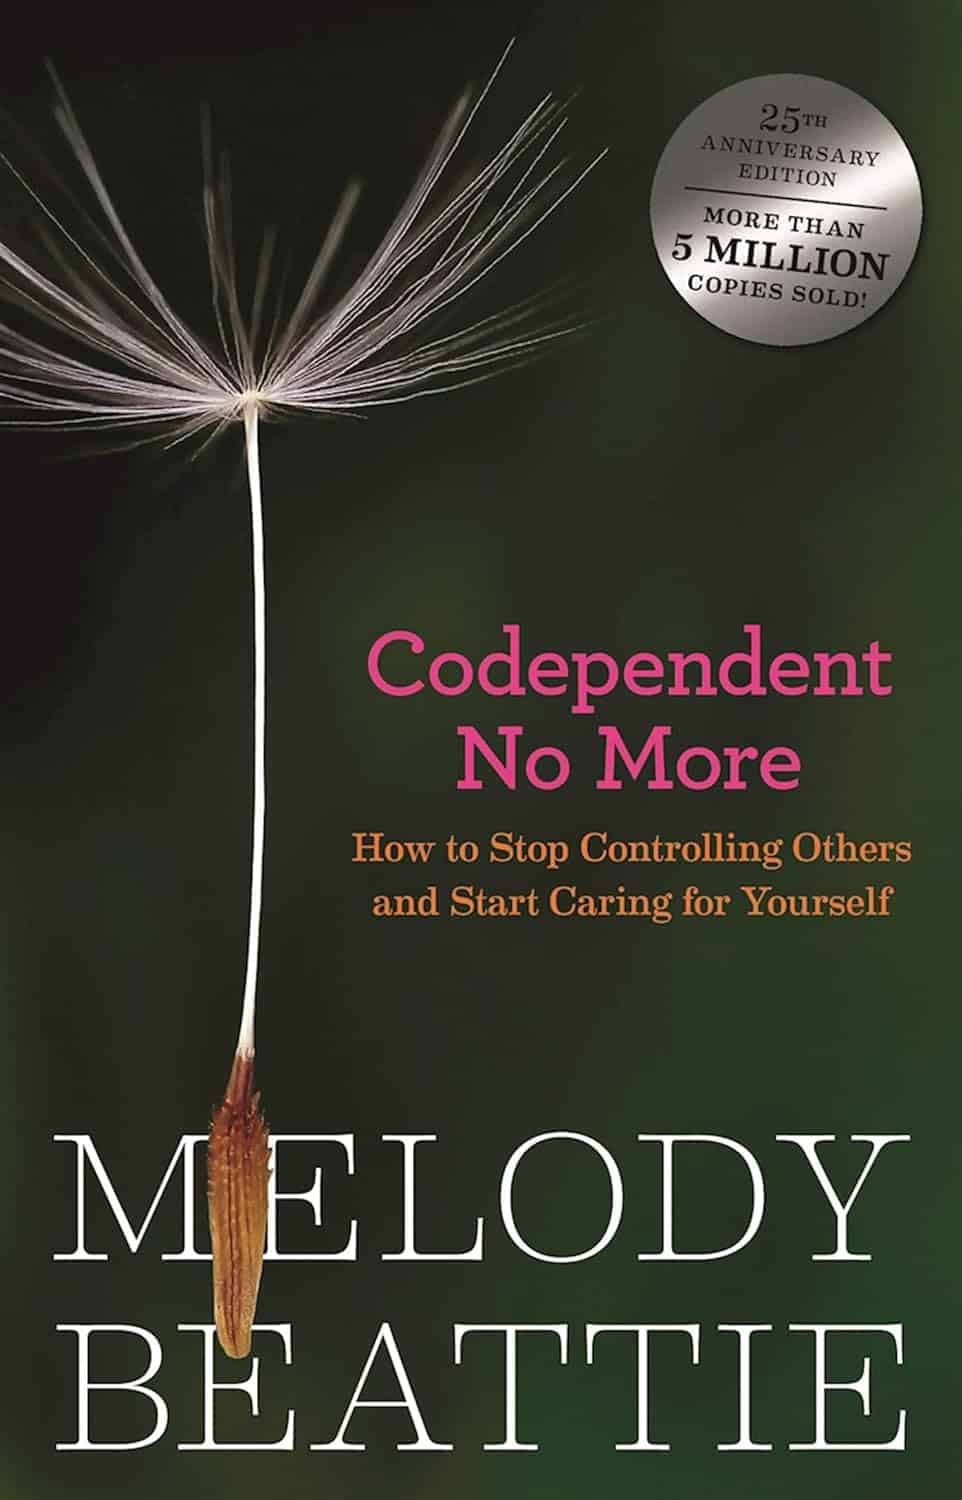 Melody Beattie Codependent No More